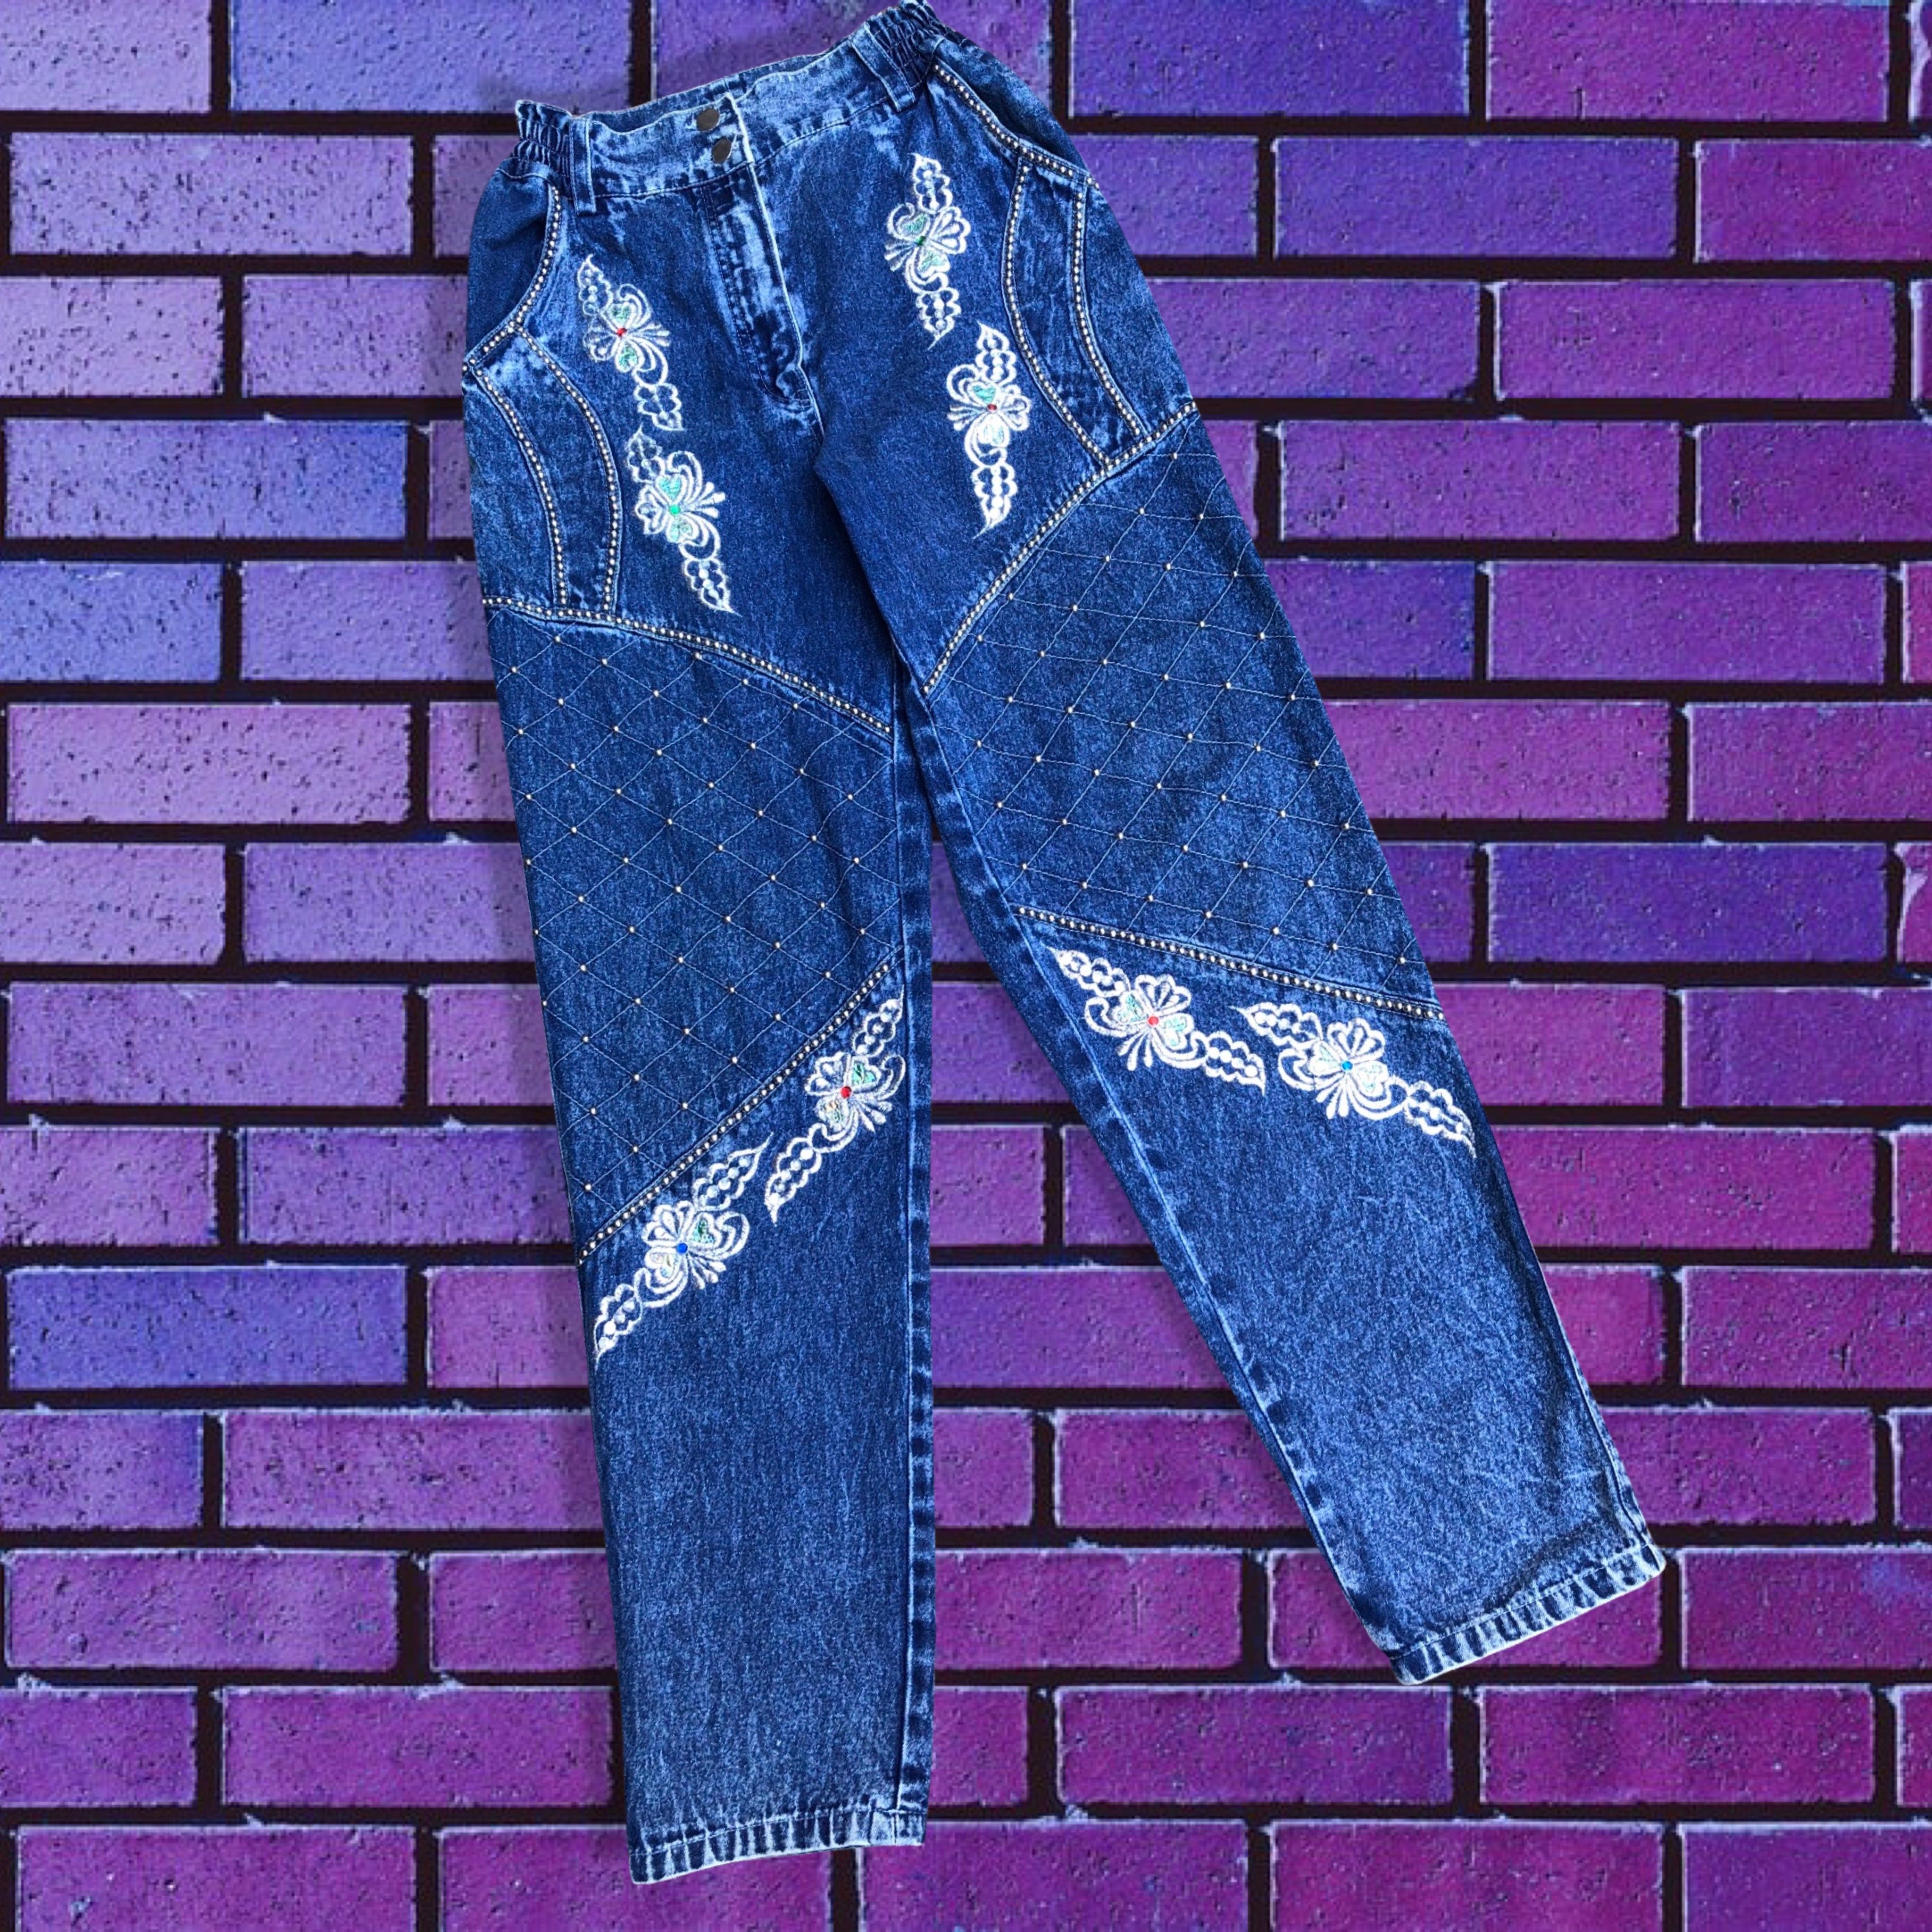 80s Bedazzled Jeans